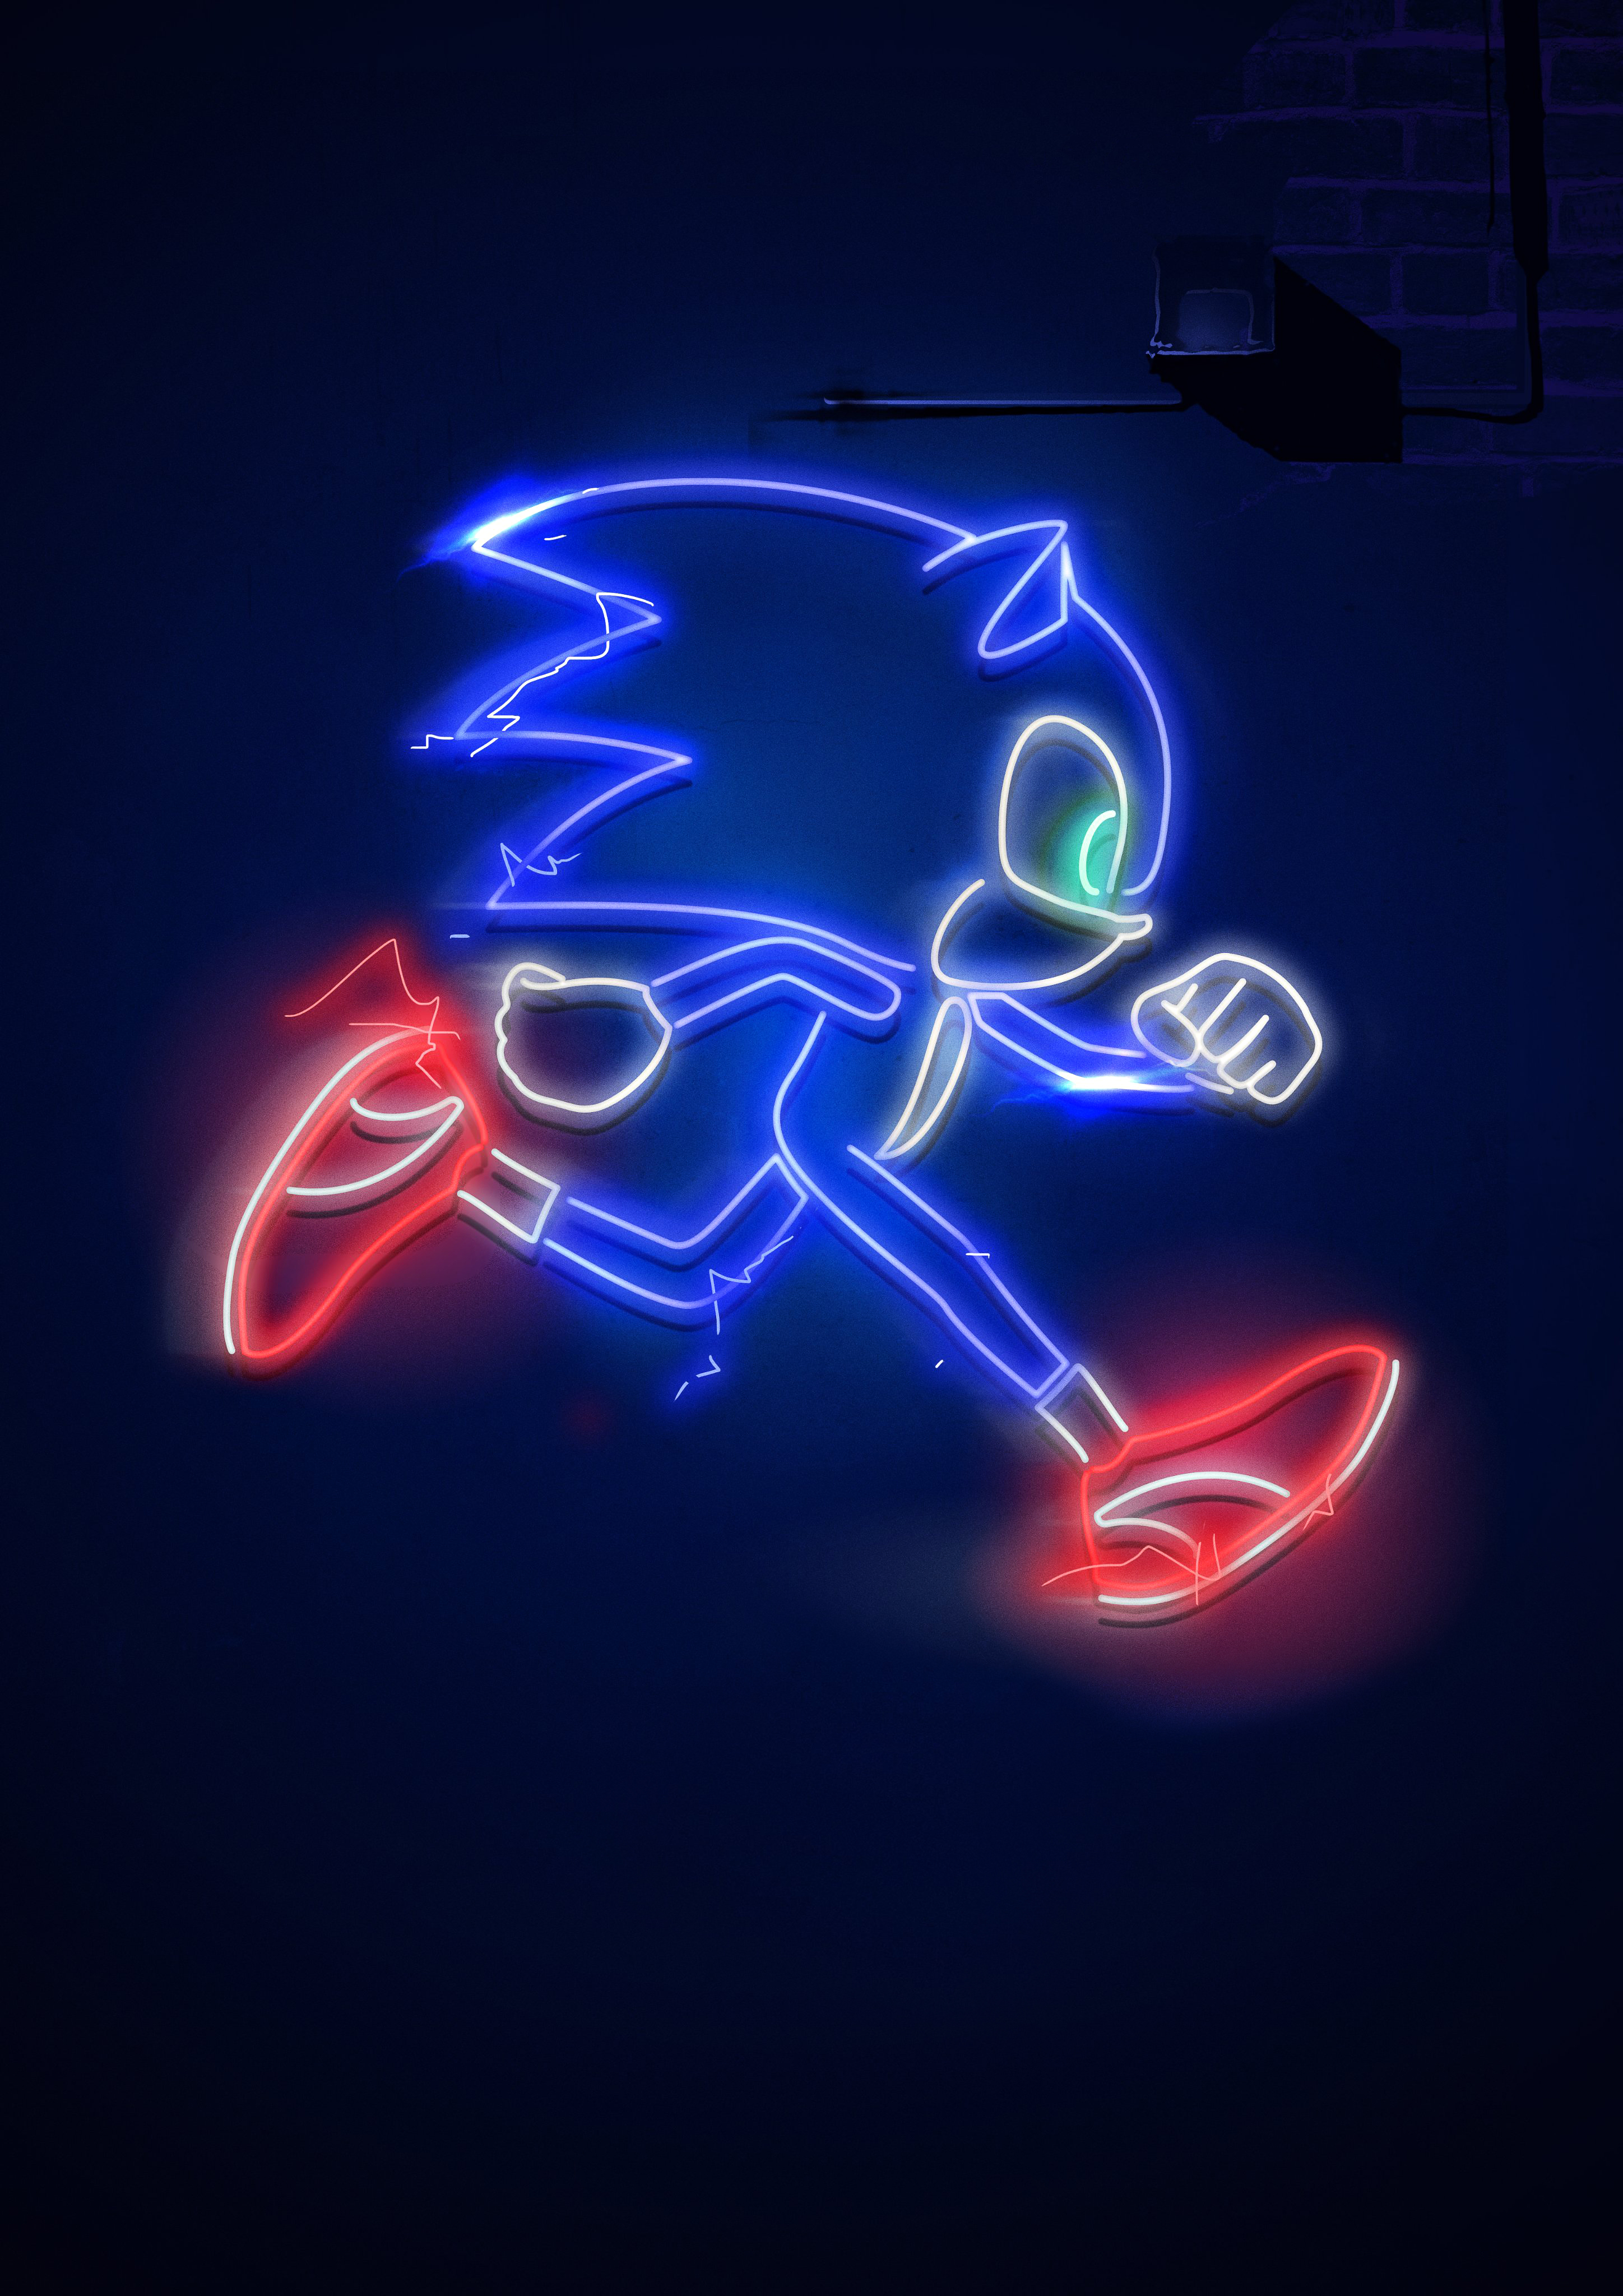 2932x2932 Sonic Hedgehog Ipad Pro Retina Display Wallpaper Hd Movies 4k Wallpapers Images Photos And Background